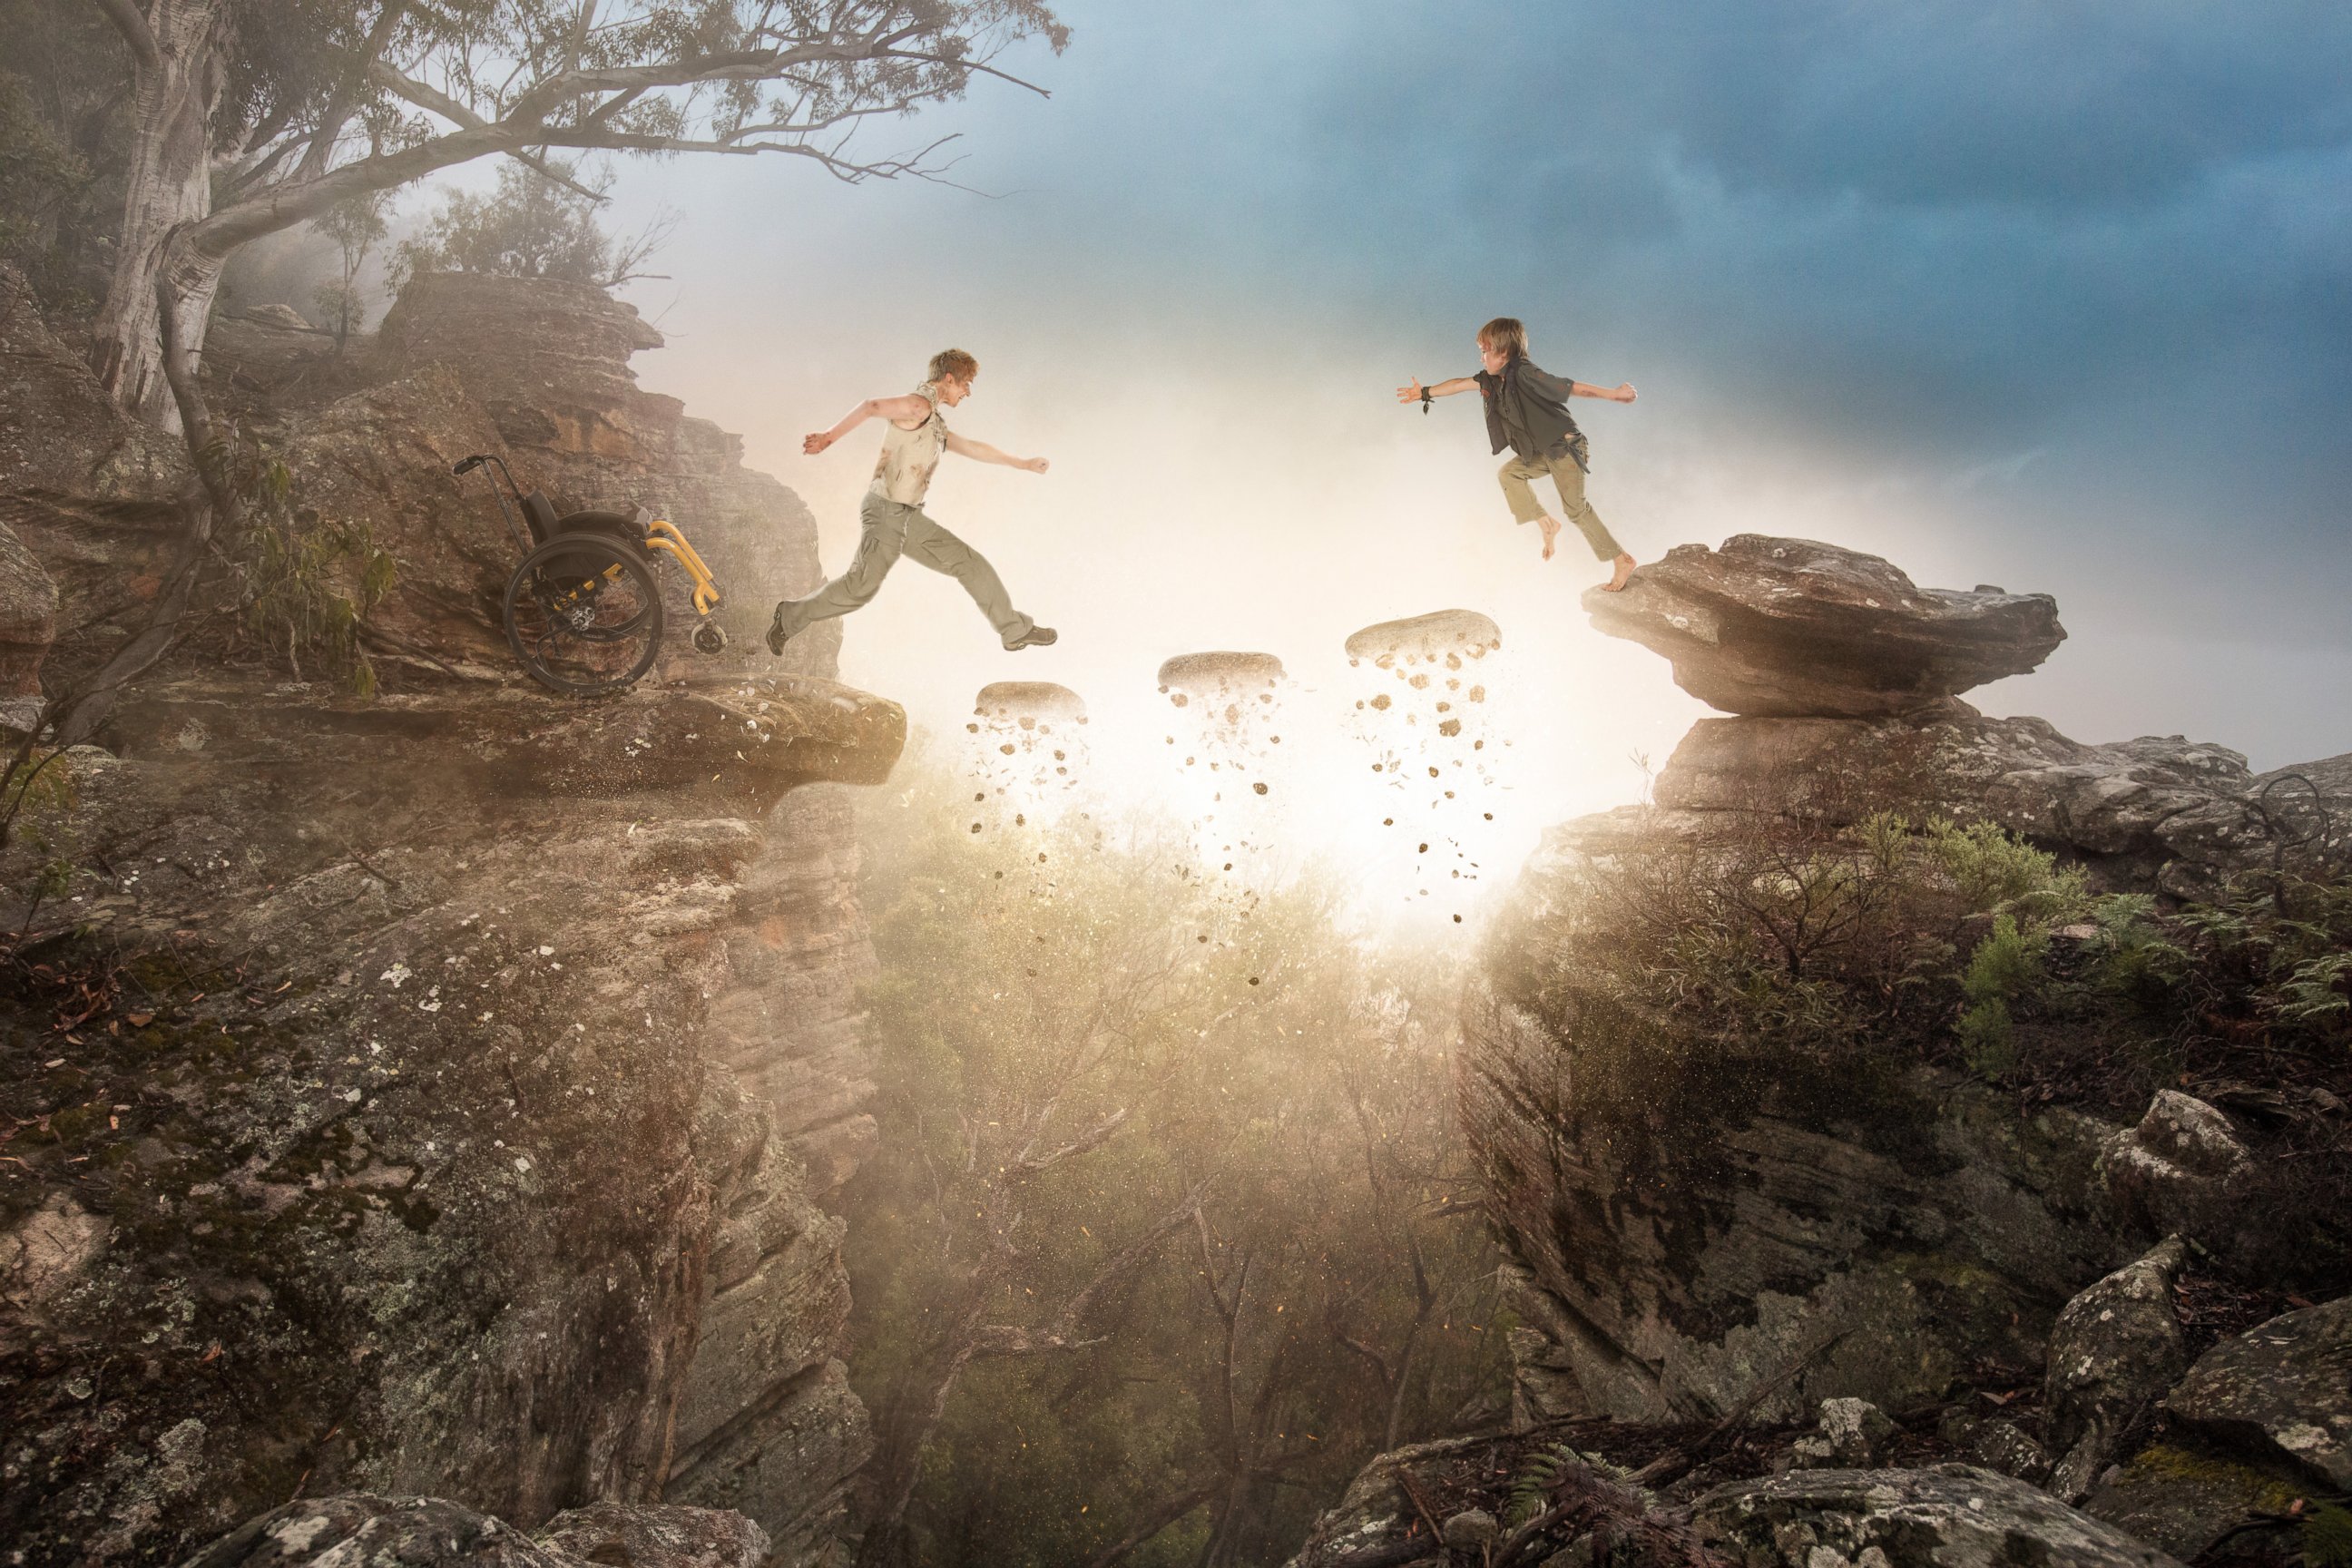 PHOTO: Photographer Karen Alsop brought mother Sarah Jane Staszak and her son Hamish inside a studio and photoshopped them into exciting adventures.